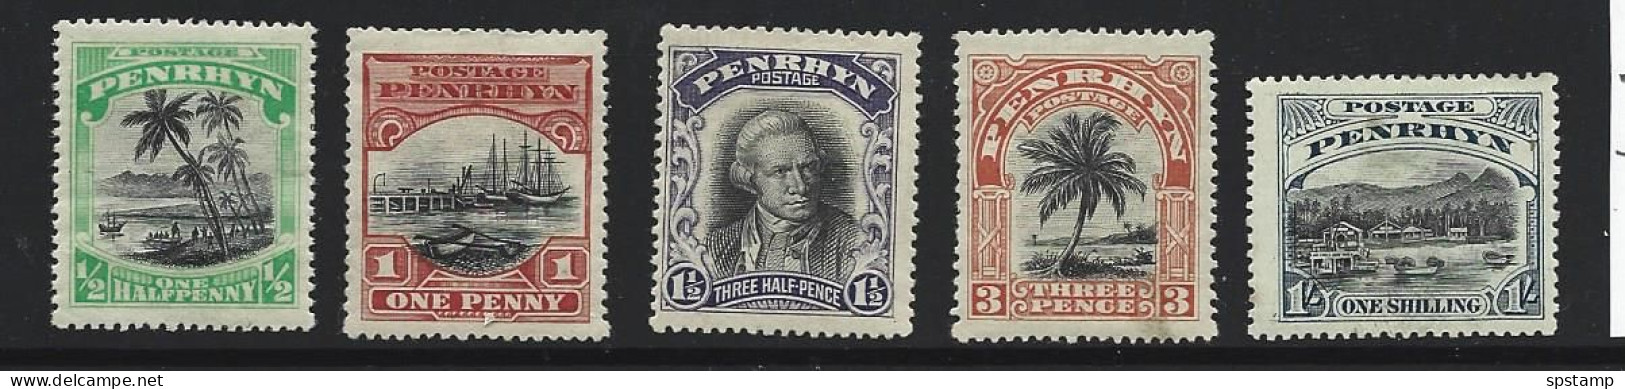 Penrhyn Island 1920 Scene Definitives Part Set Of 5 Attractive Mint , Some Blemishes - Penrhyn